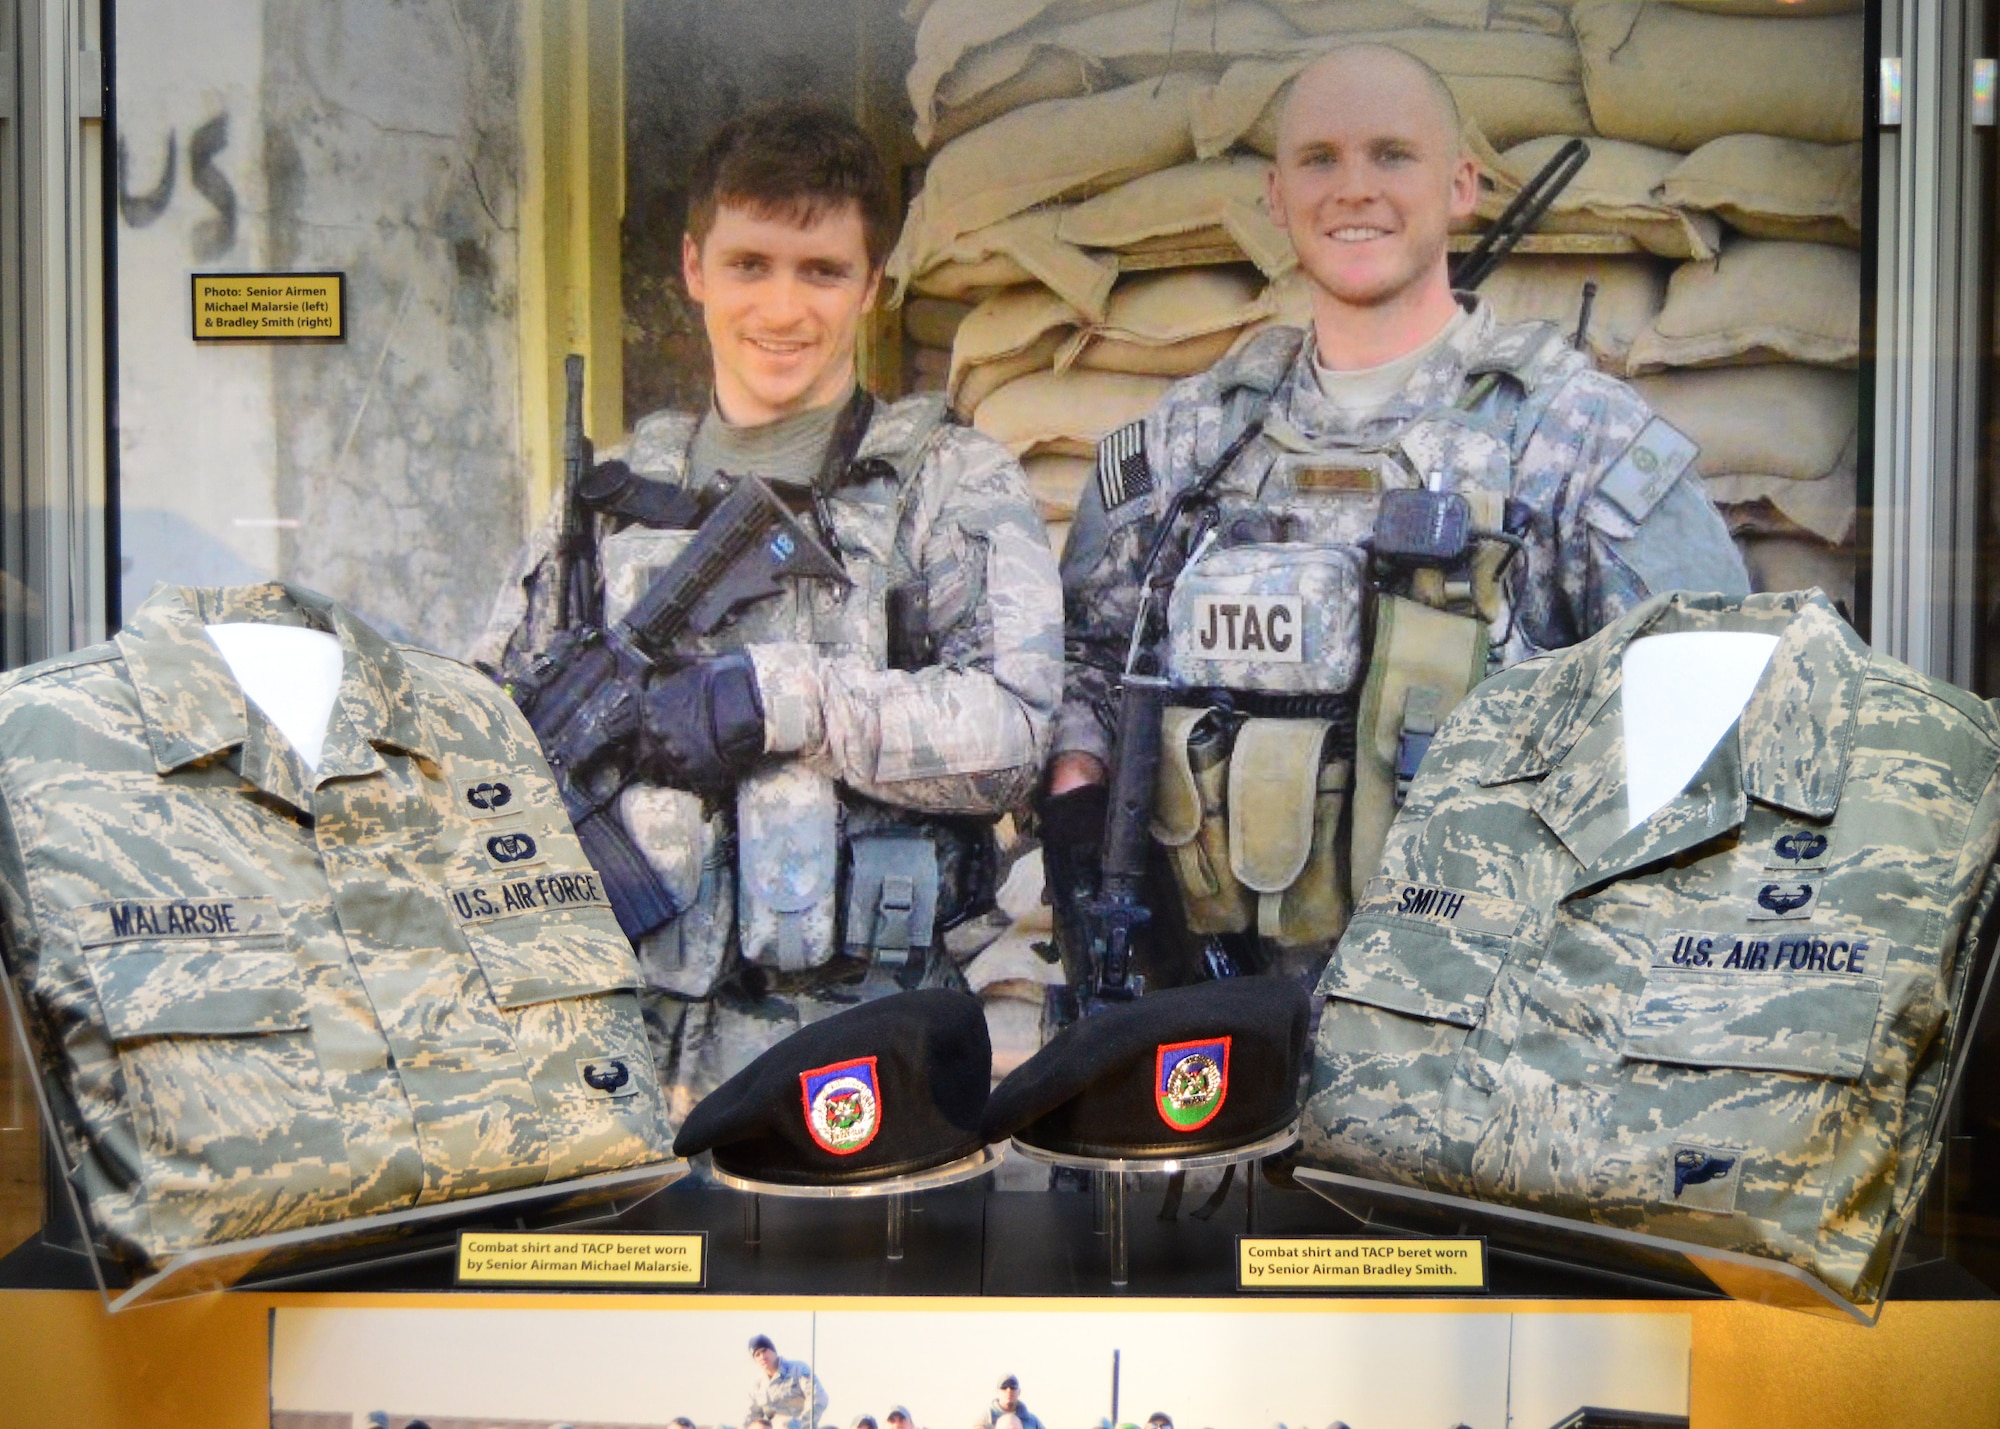 DAYTON, Ohio -- The "Duty First, Always Ready" exhibit, located in the Cold War Gallery at the National Museum of the U.S. Air Force, highlights the service of Senior Airmen Michael Malarsie and Bradley Smith, a two-man Joint Terminal Attack Controller (JTAC) who deployed together to Afghanistan in December 2009. (U.S. Air Force photo)
